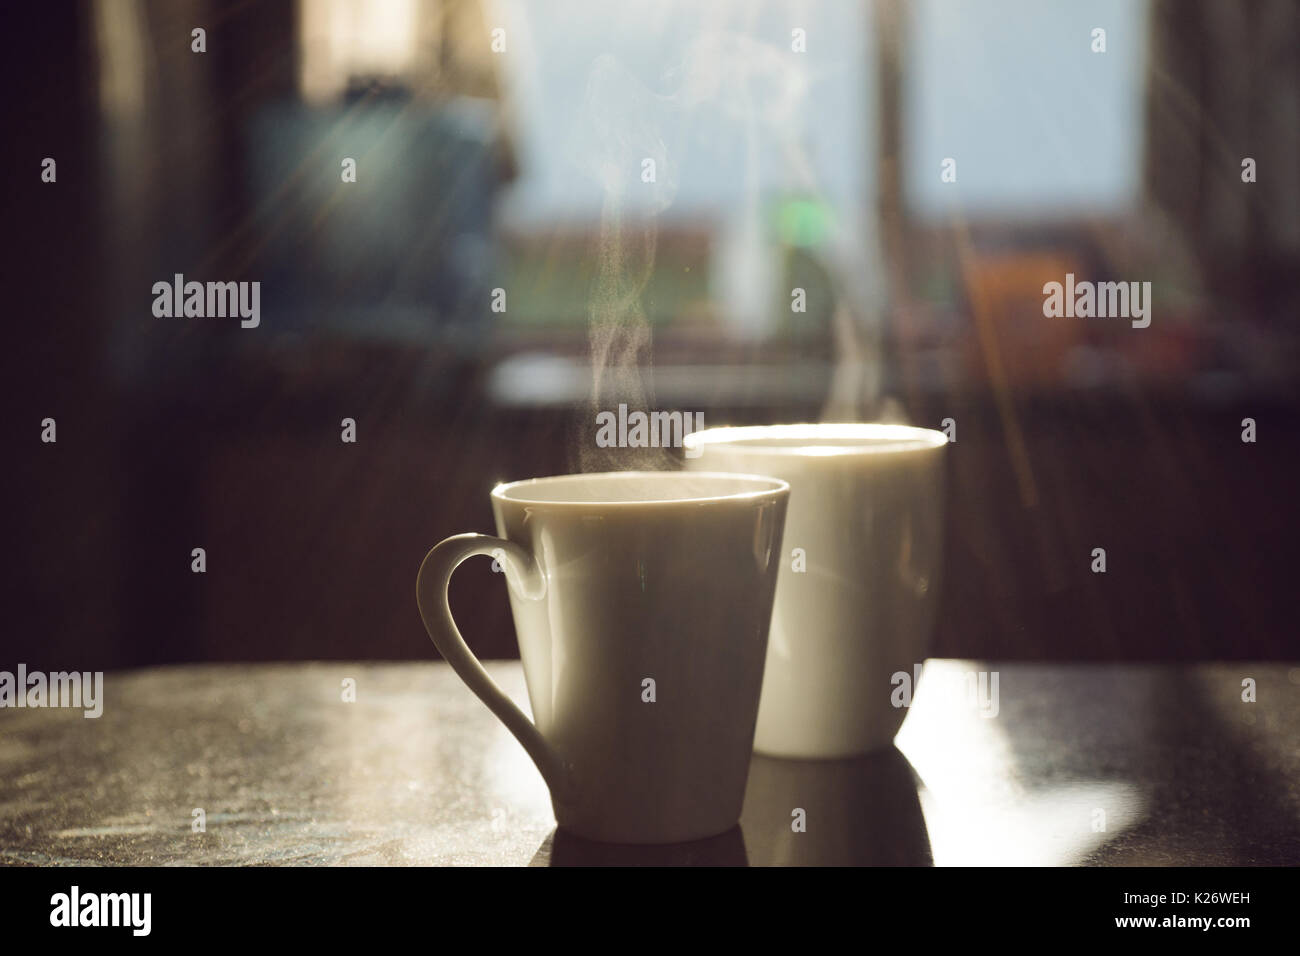 Two cups of coffee, steaming, standing on table, backlit Stock Photo